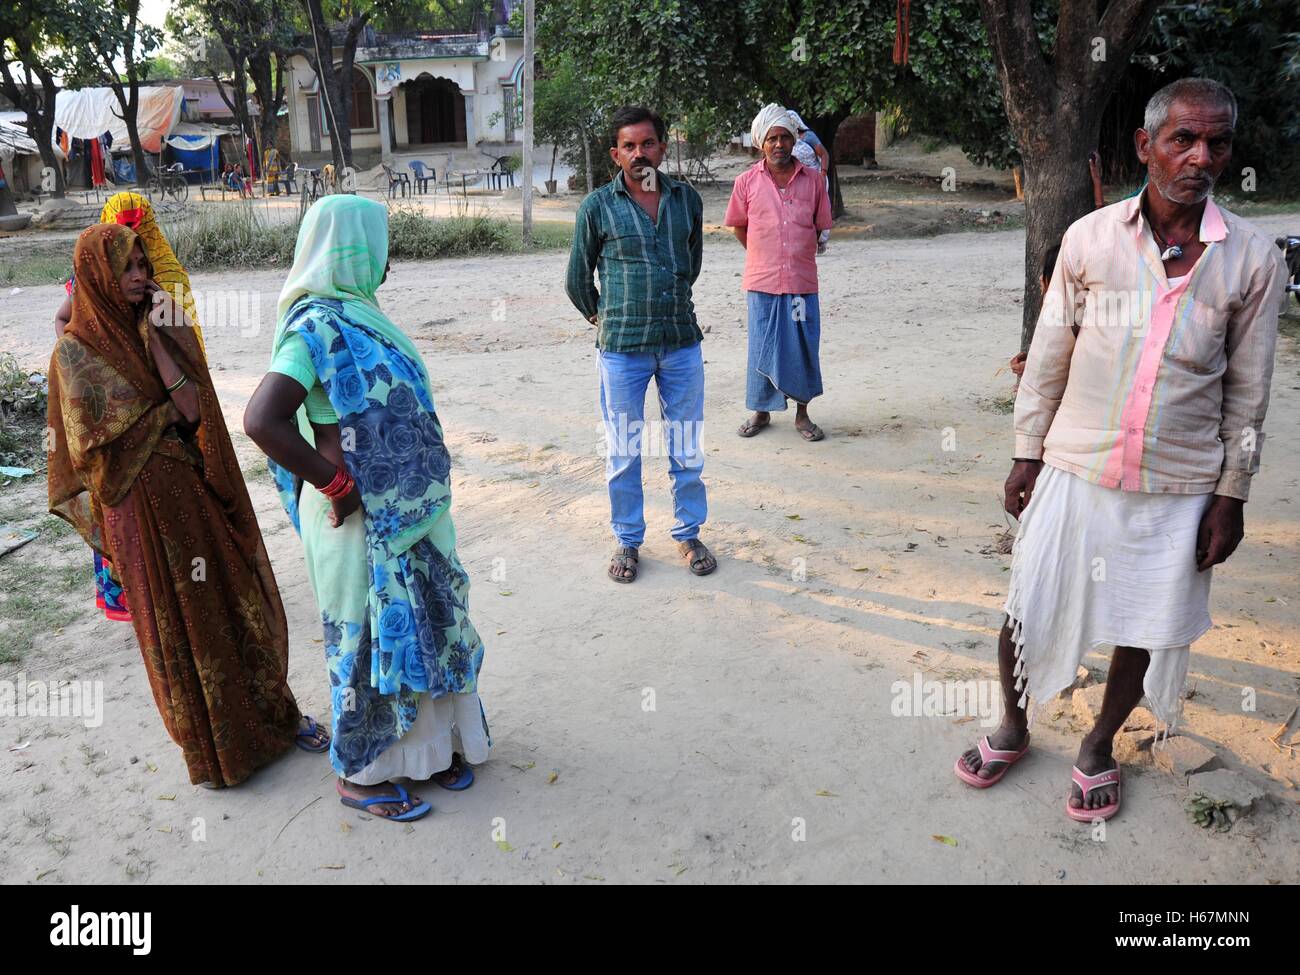 Allahabad, India. 24th Oct, 2016. Villagers gathered in near Dharmendra house as a Dharmendra alleged died of hunger at Mauaima village. A 28-year-old unemployed Dalit man Dharmendra allegedly died of hunger in a village of Uttar Pradesh's Allahabad district on Sunday morning. His wife Usha Devi too was found fighting for life without a morsel of food in their home. The district administration, however, instructed action against the local officials and the owner of the fair price shop, which provides government subsidized food to the poor. © Prabhat Kumar Verma/Pacific Pres/Alamy Live News Stock Photo